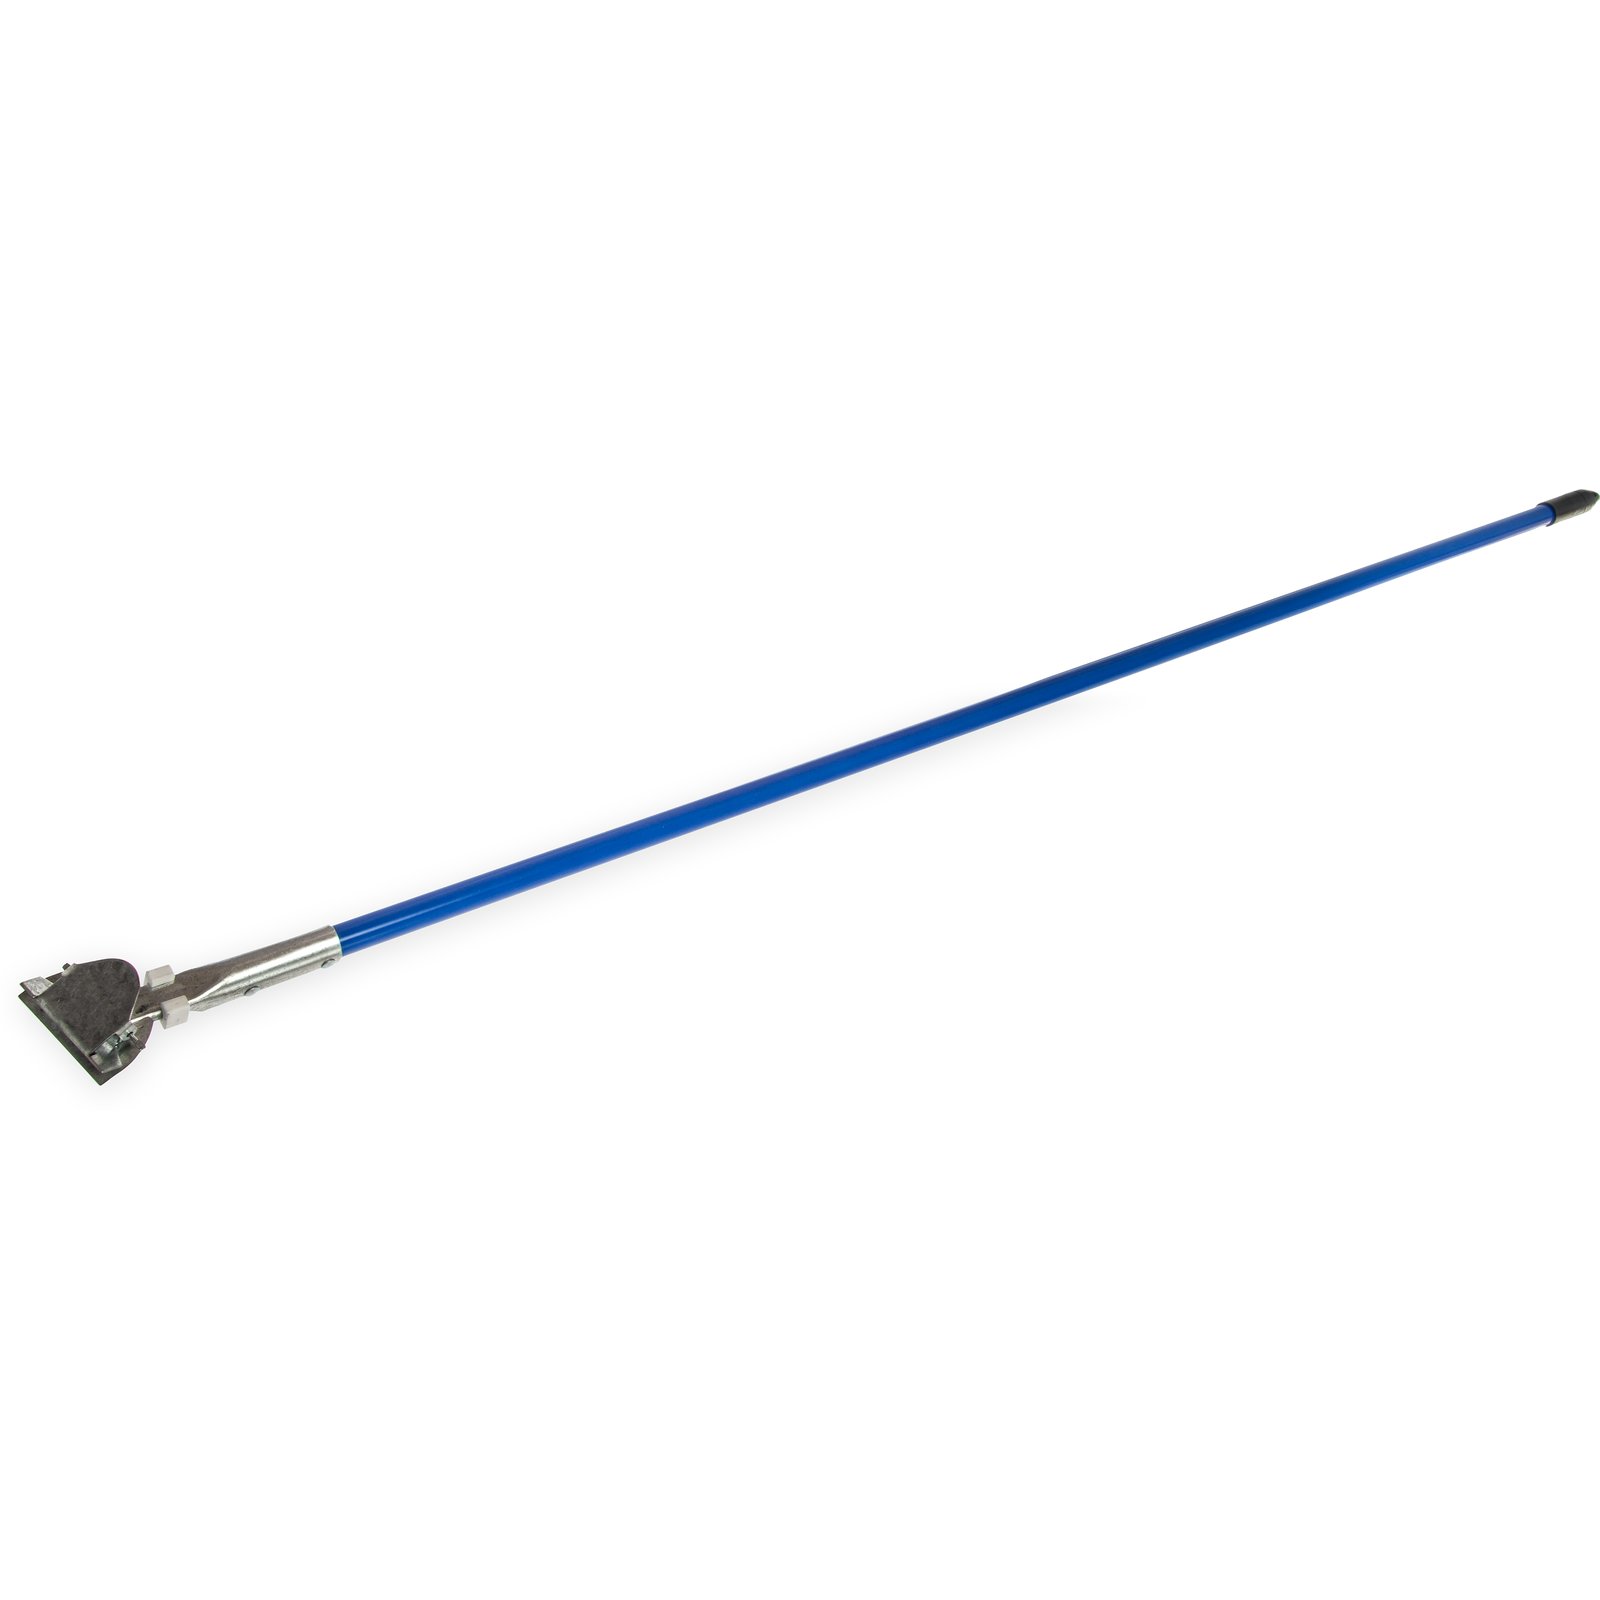 HANDLE DUST MOP 60&quot; VINYL
COATED METAL BLUE WITH CLIP ON
CONNECTOR 